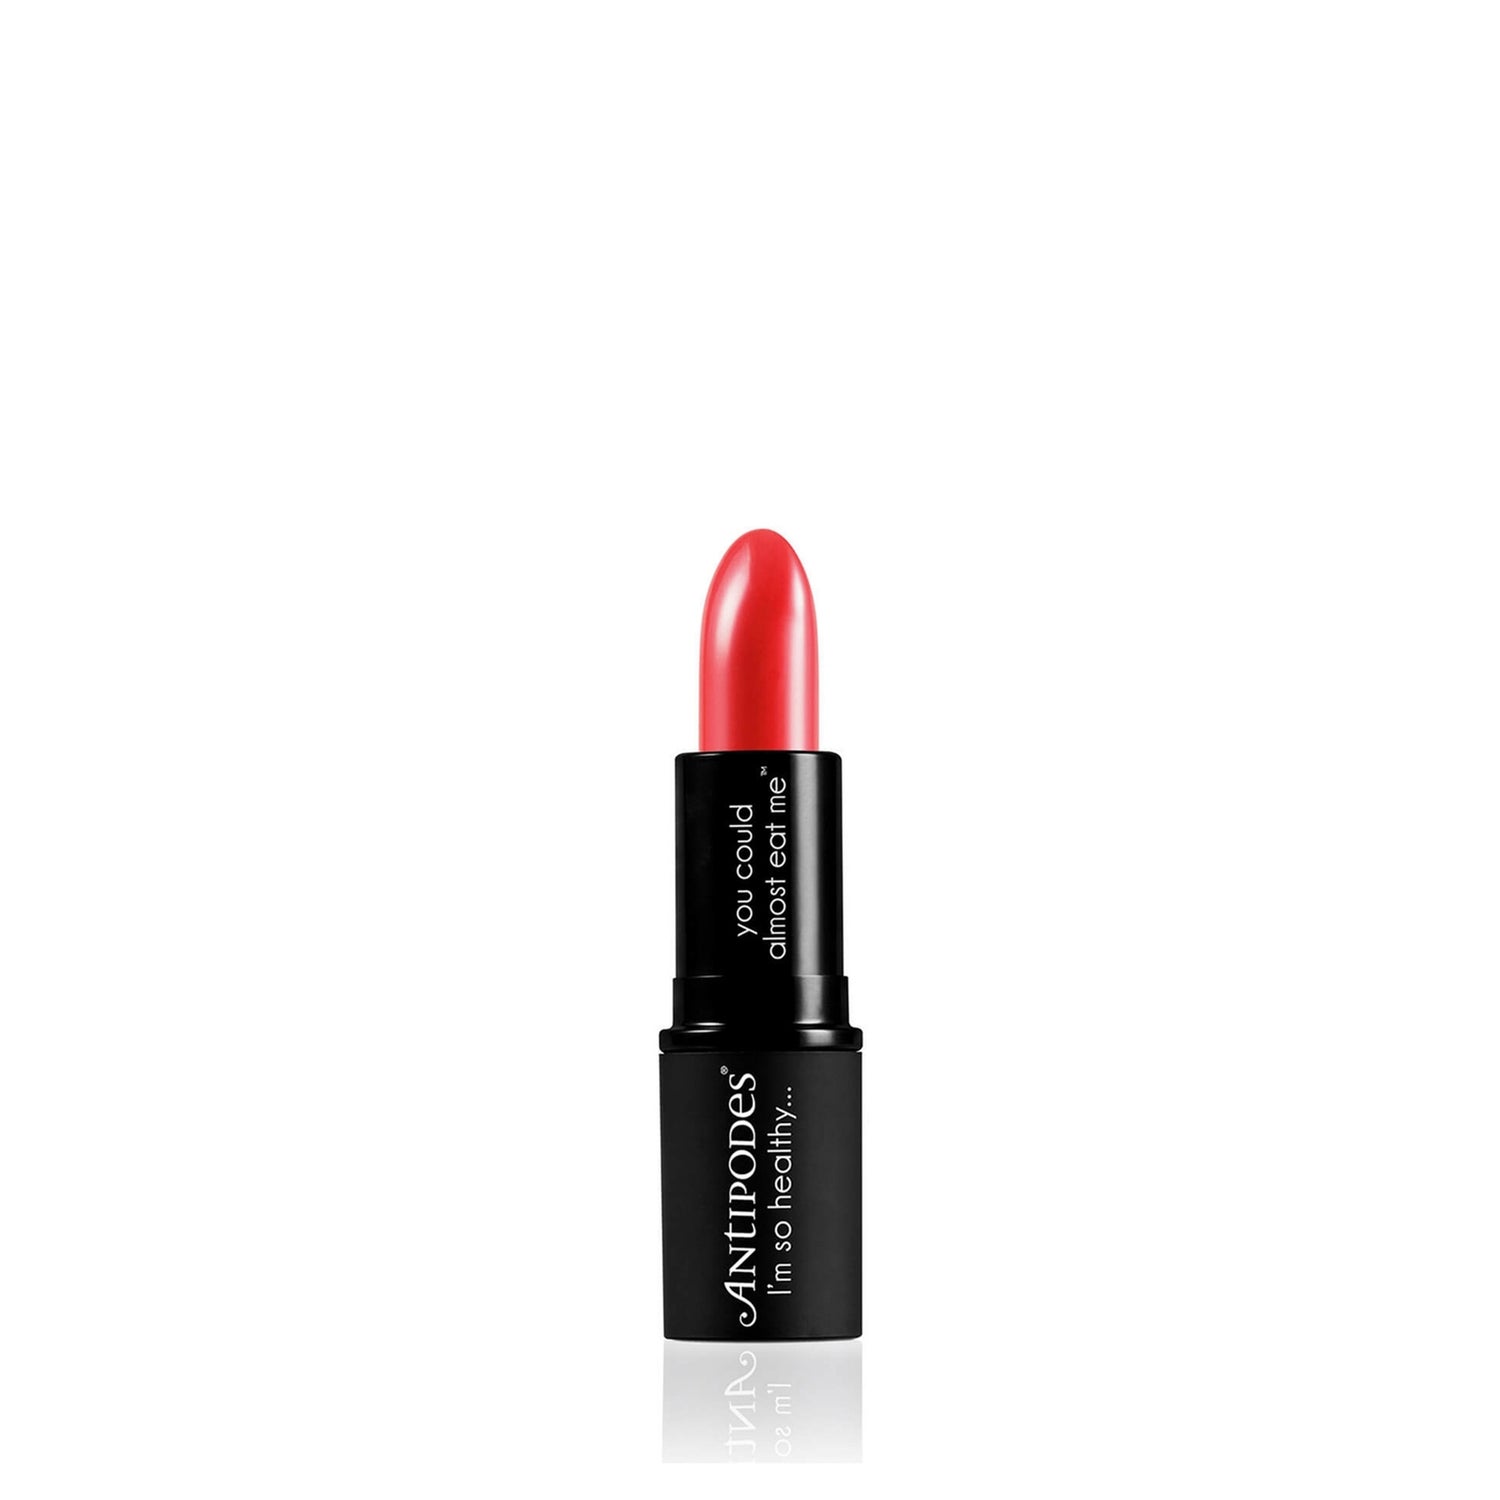 Antipodes Lipstick 4 g – South Pacific Coral